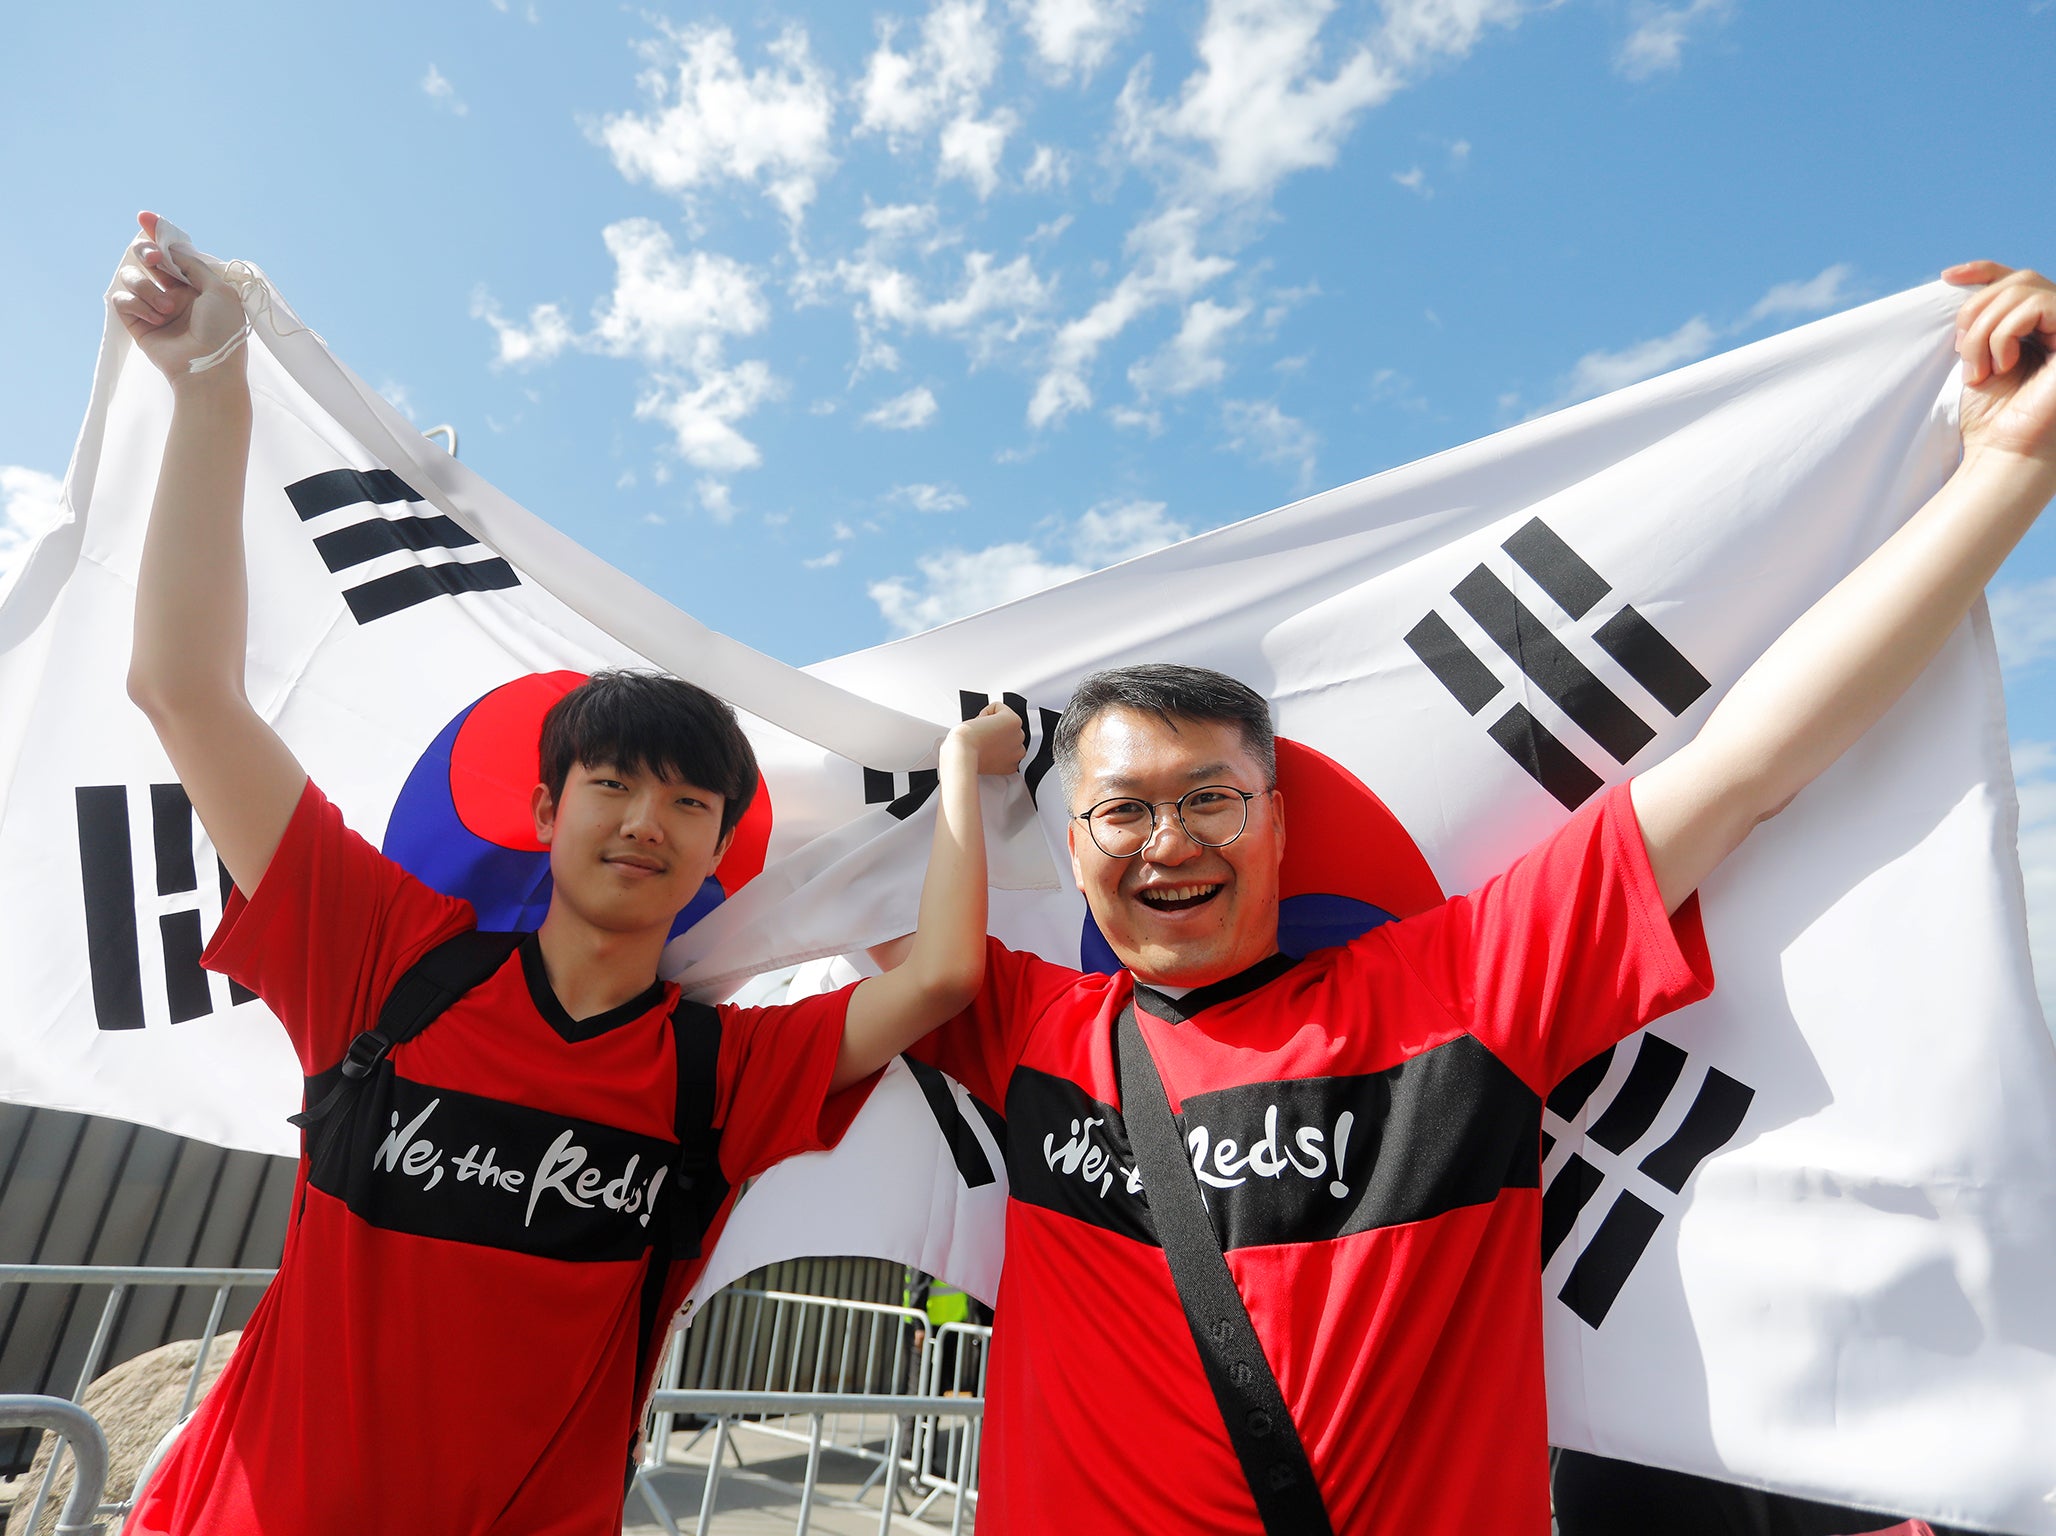 Enthusiasm for football in South Korea is waning